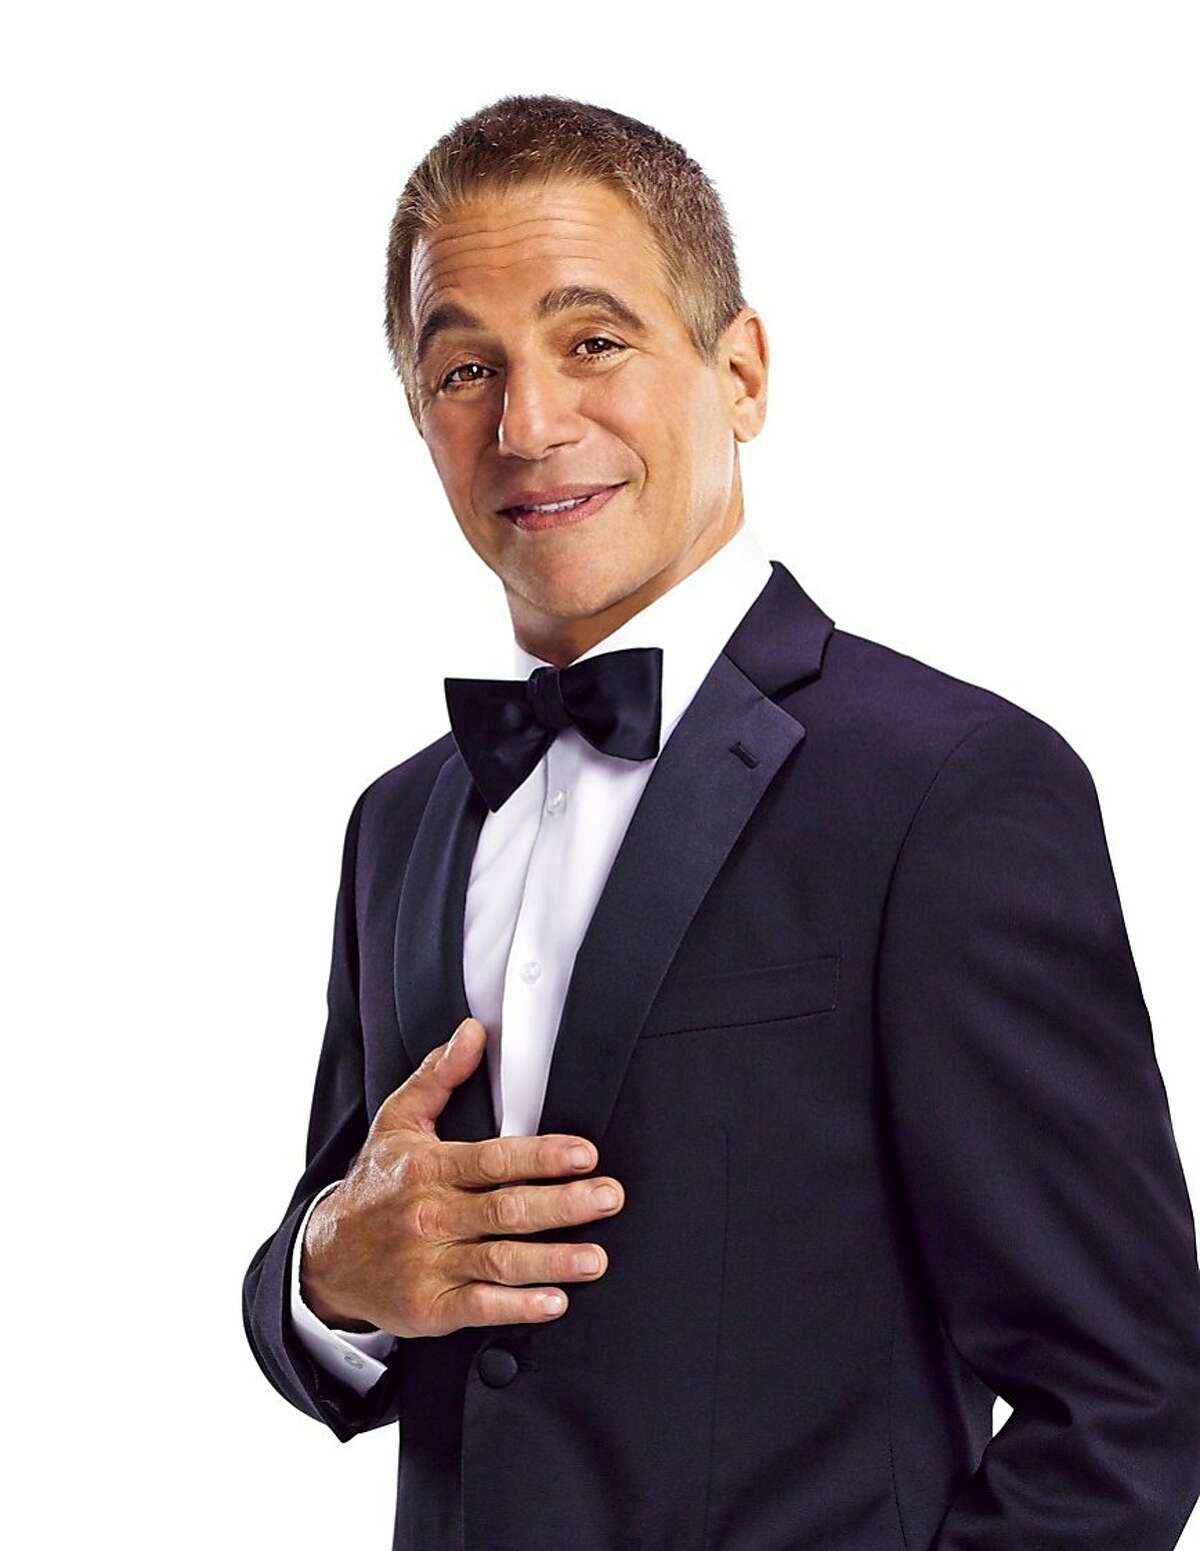 After rising to stardom on TV shows "Taxi" and "Who's the Boss," Tony Danza ended up on Broadway in plays and musicals. Now he's a cabaret crooner and brings his show "Standards & Stories" for three performances Friday, Sept. 18 through Sunday, Sept. 20 at Feinstein's at the Nikko. Photo: Courtesy of Feinstein's at the Nikko